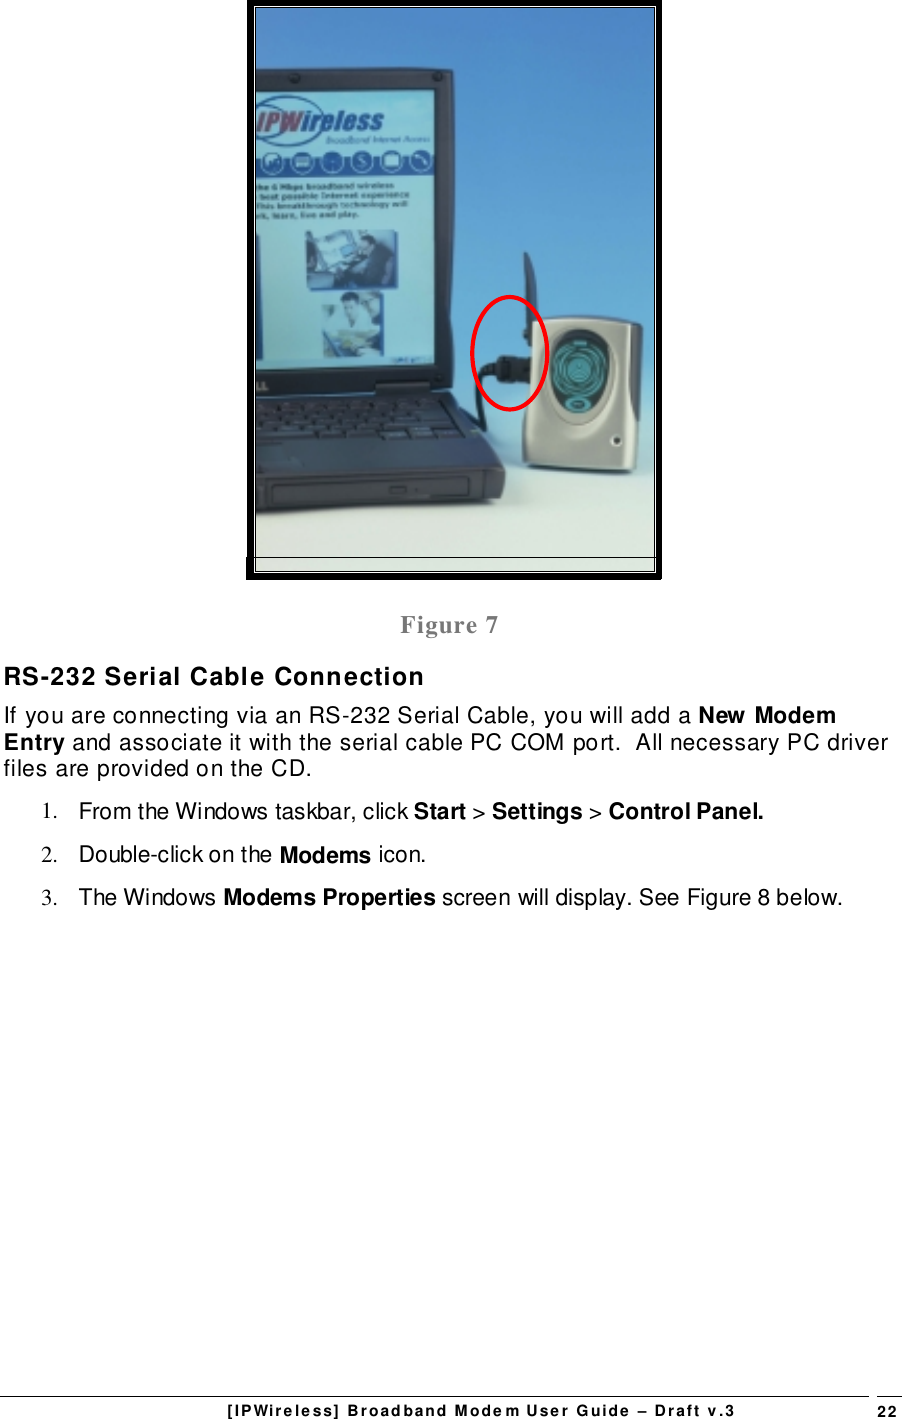 [IPWireless] Broadband Modem User Guide – Draft v.3 22Figure 7RS-232 Serial Cable ConnectionIf you are connecting via an RS-232 Serial Cable, you will add a New ModemEntry and associate it with the serial cable PC COM port.  All necessary PC driverfiles are provided on the CD.1.  From the Windows taskbar, click Start &gt; Settings &gt; Control Panel.2.  Double-click on the Modems icon.3. The Windows Modems Properties screen will display. See Figure 8 below.